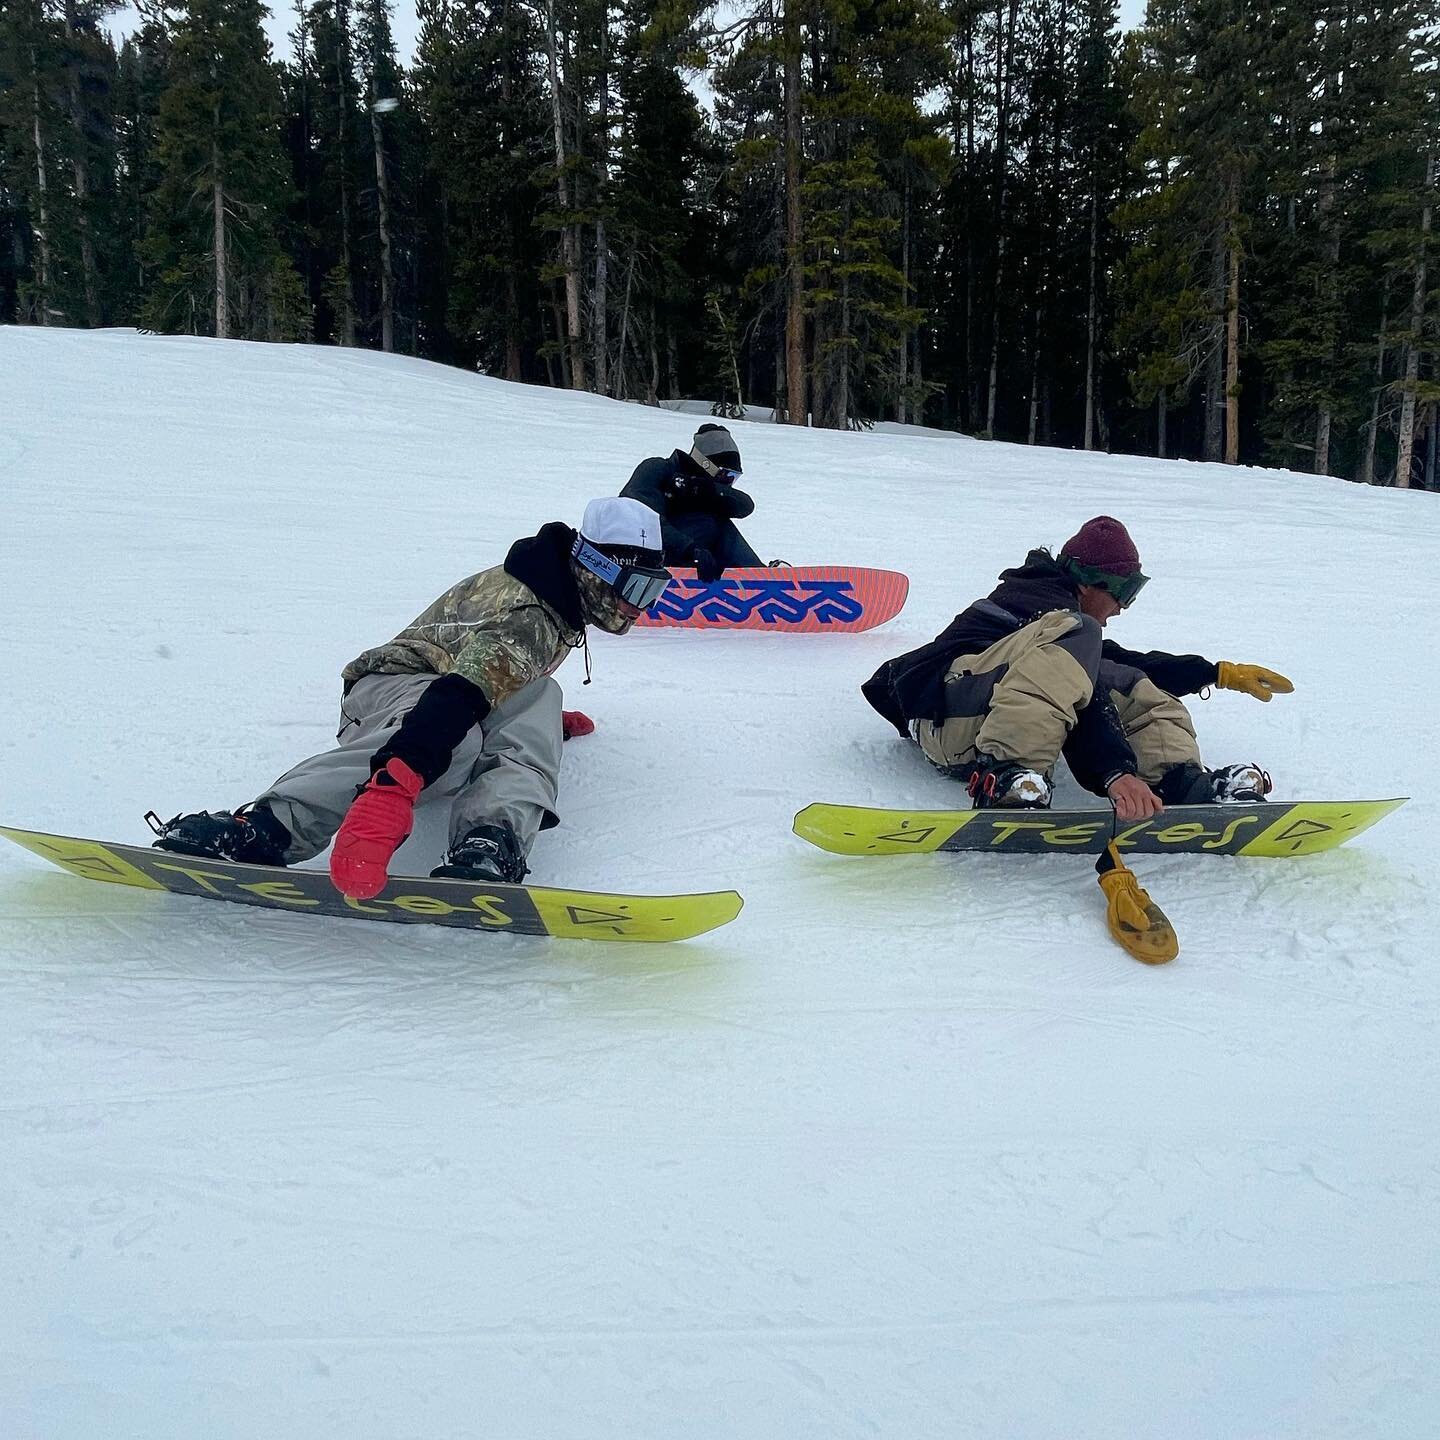 not staged&hellip;😈
swipe for resources

*skate night 4/19 at the gunnison park
*apparel pre-order coming soon!
.
.
.
#gunnisonvalley 
#snowboardgirls
#snowboarding4life 
#relax
#travelcrestedbutte